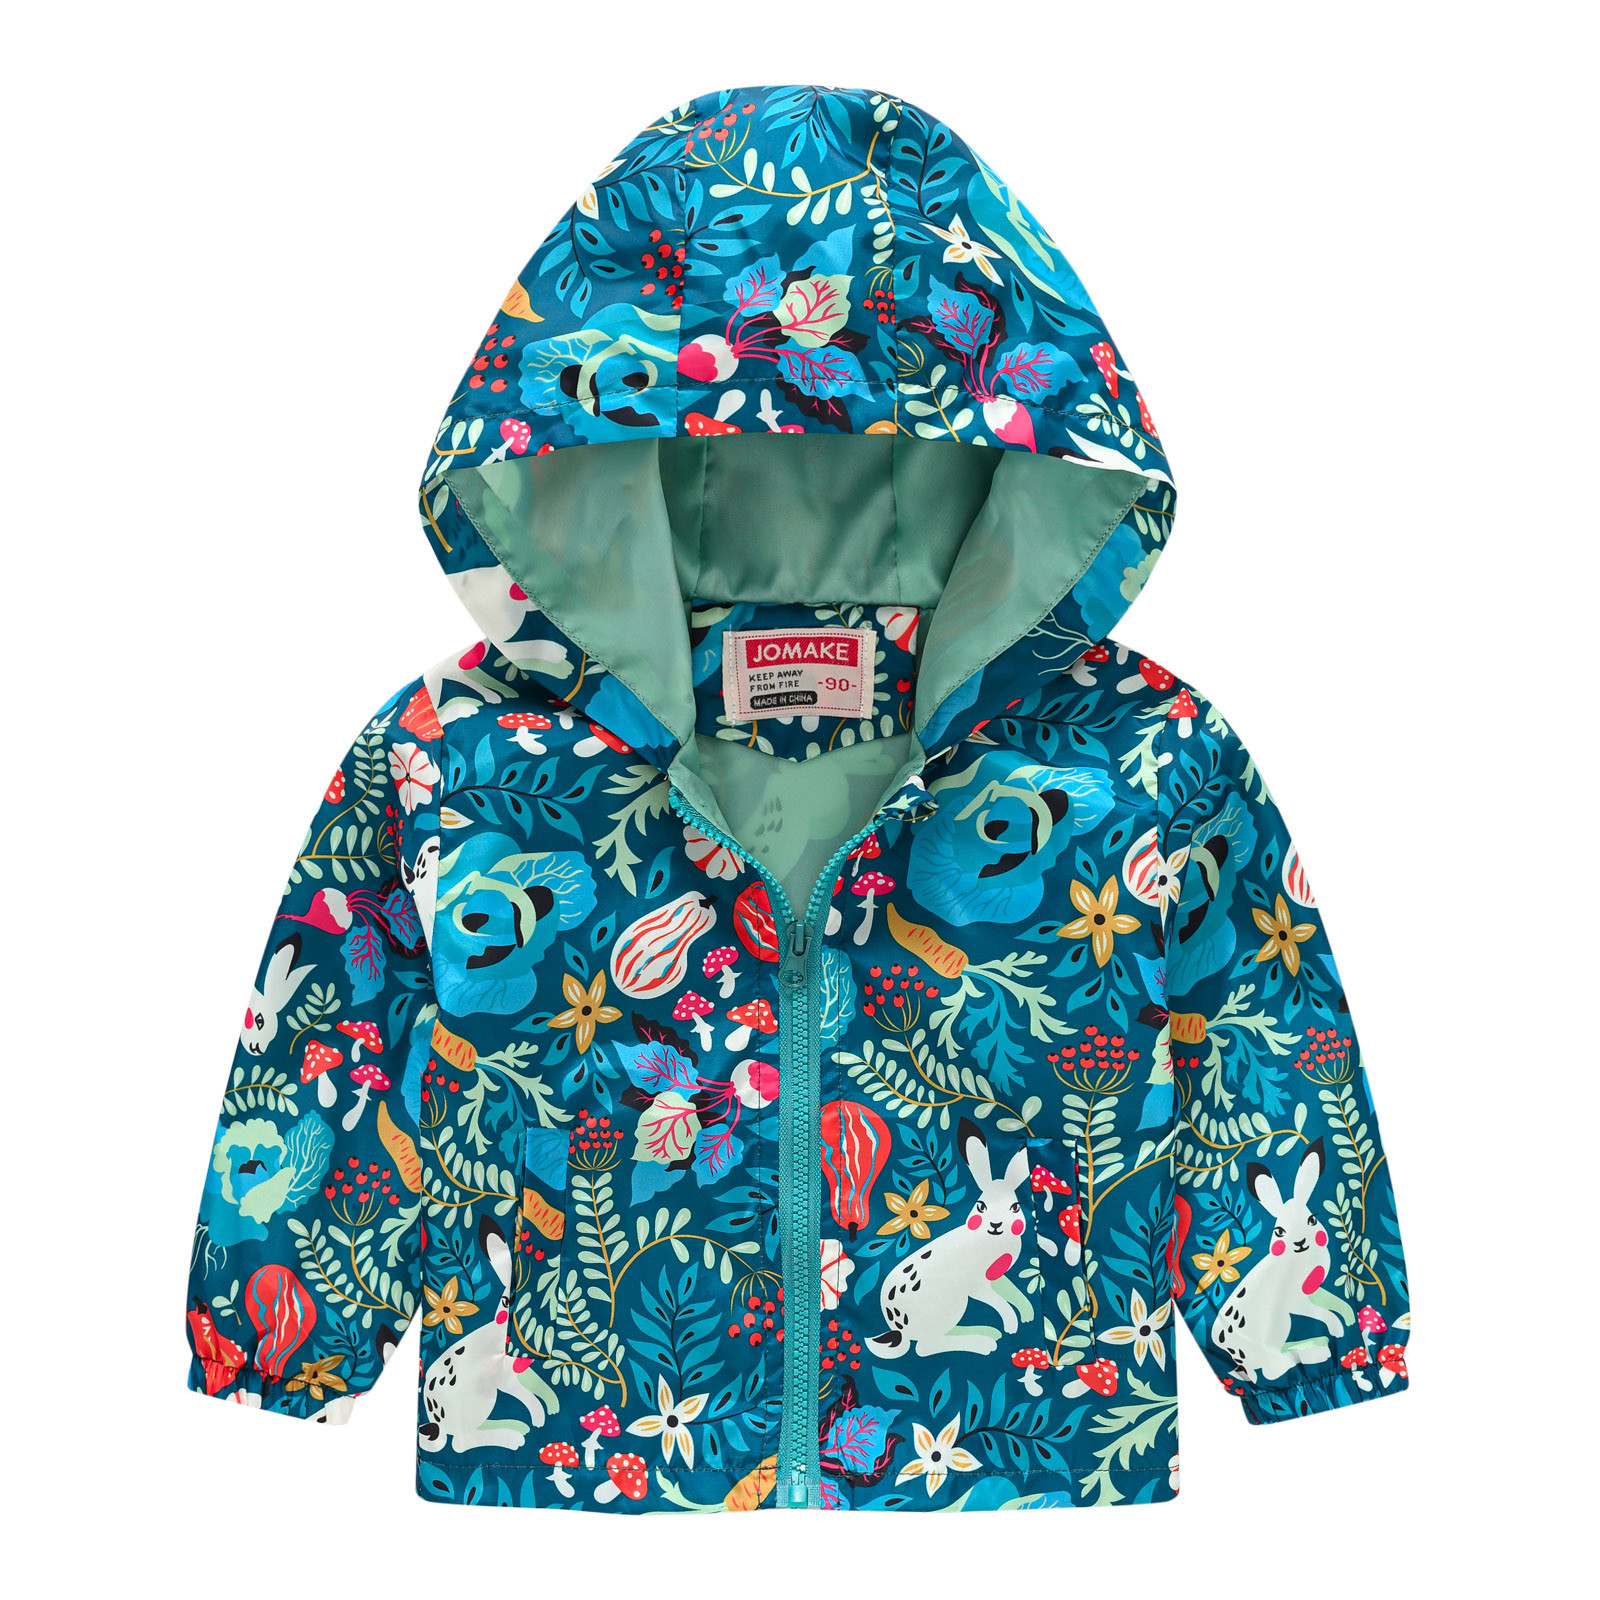 Toddler Boys Girls Casual Jackets Printing Cartoon Hooded Outerwear ...